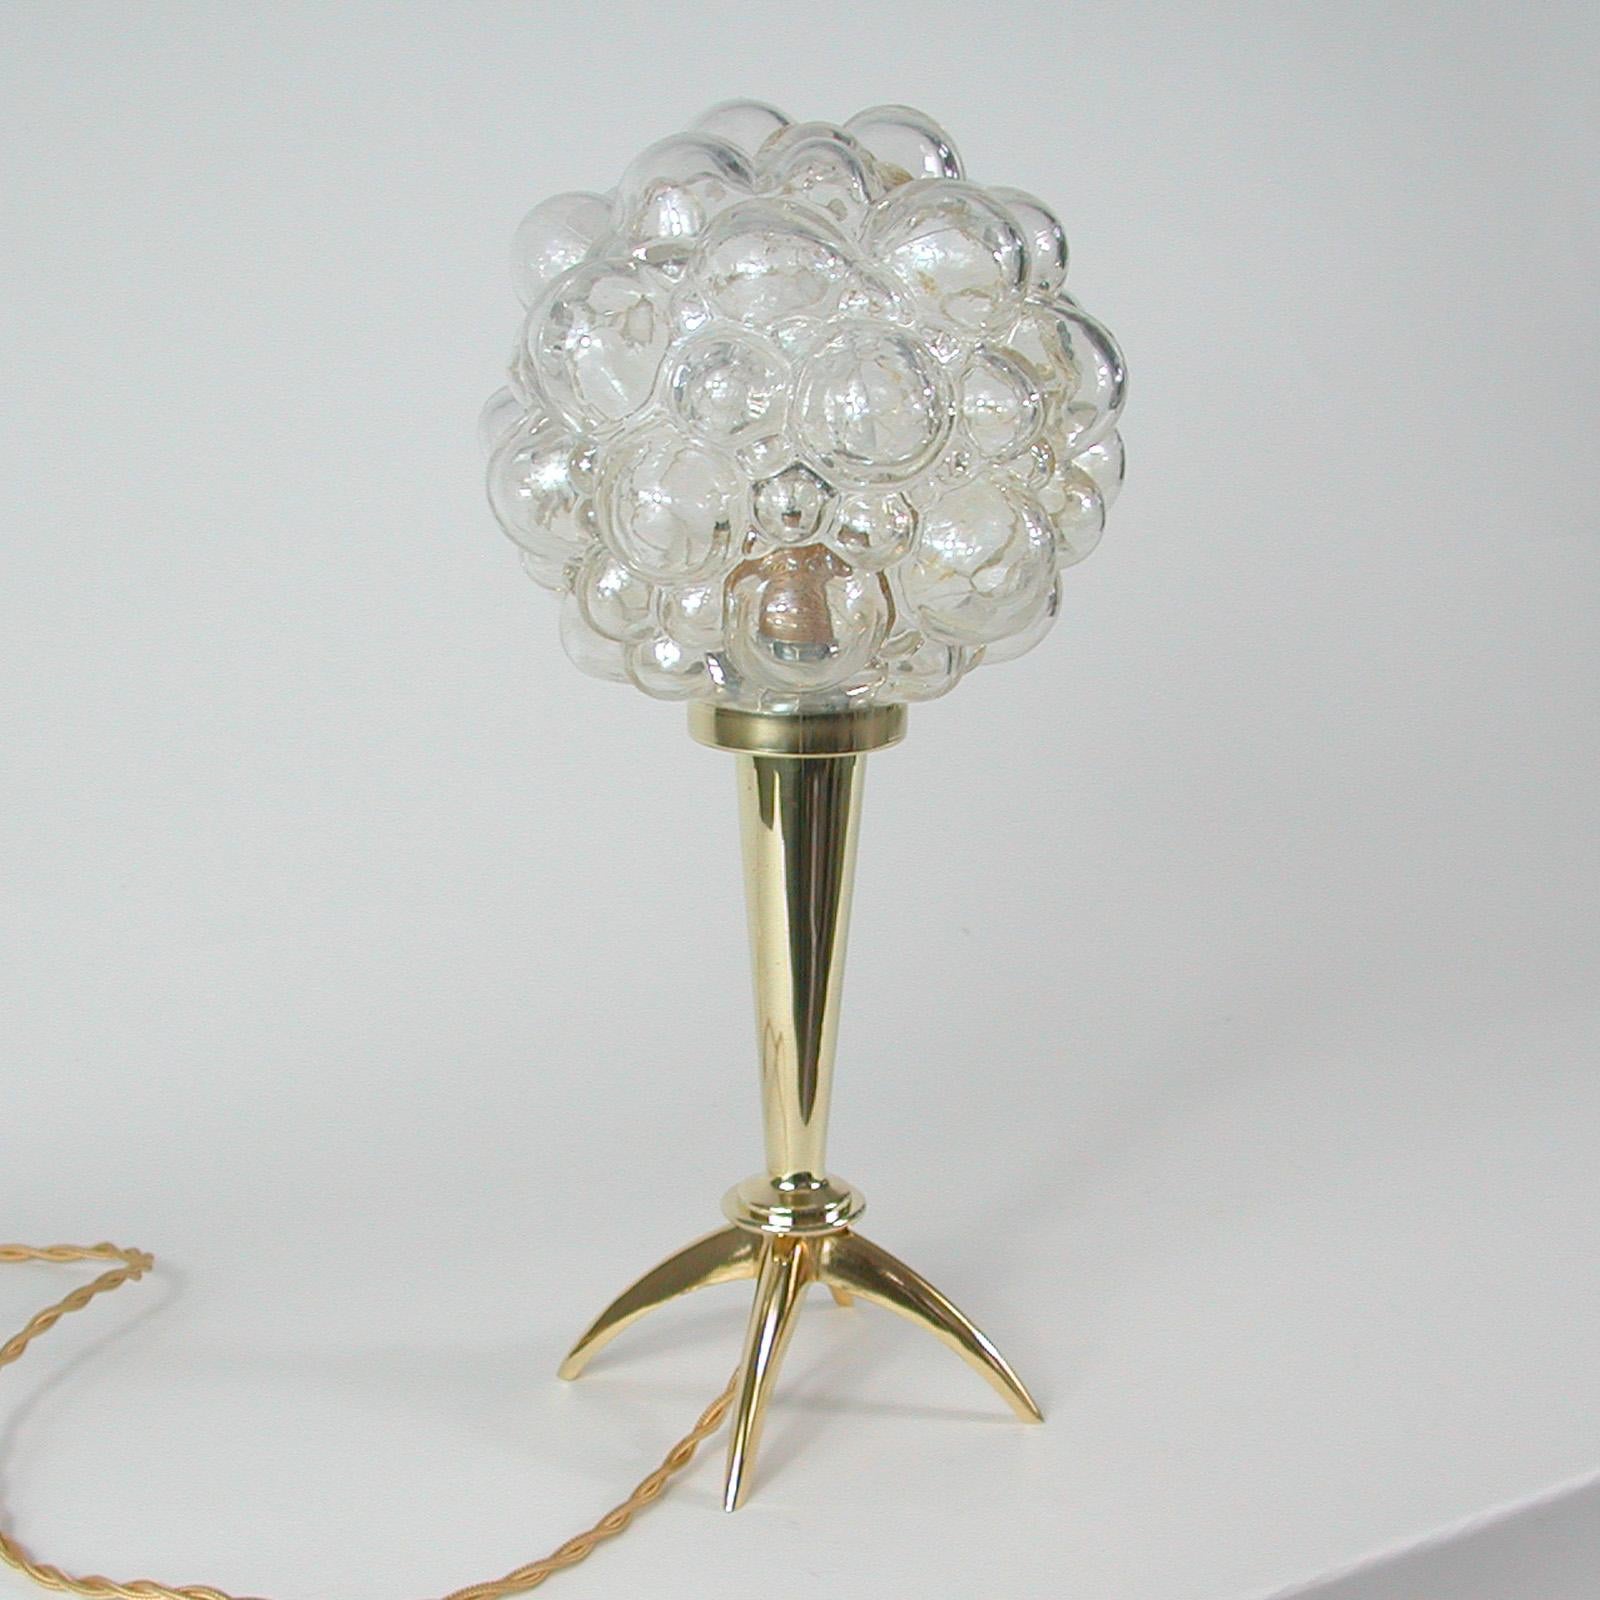 Midcentury Bubble Glass and Brass Table Lamp by Helena Tynell for Limburg, 1960s For Sale 3